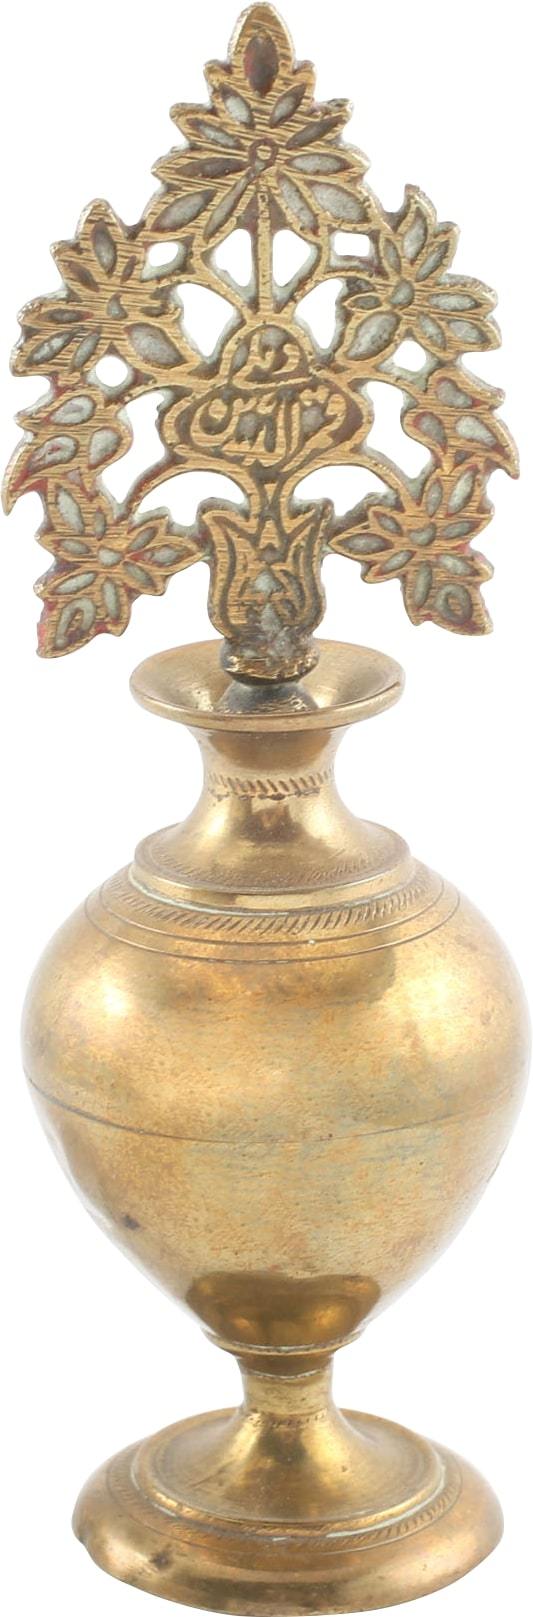 INDIAN SCENT (PERFUME) BOTTLE - Fagan Arms